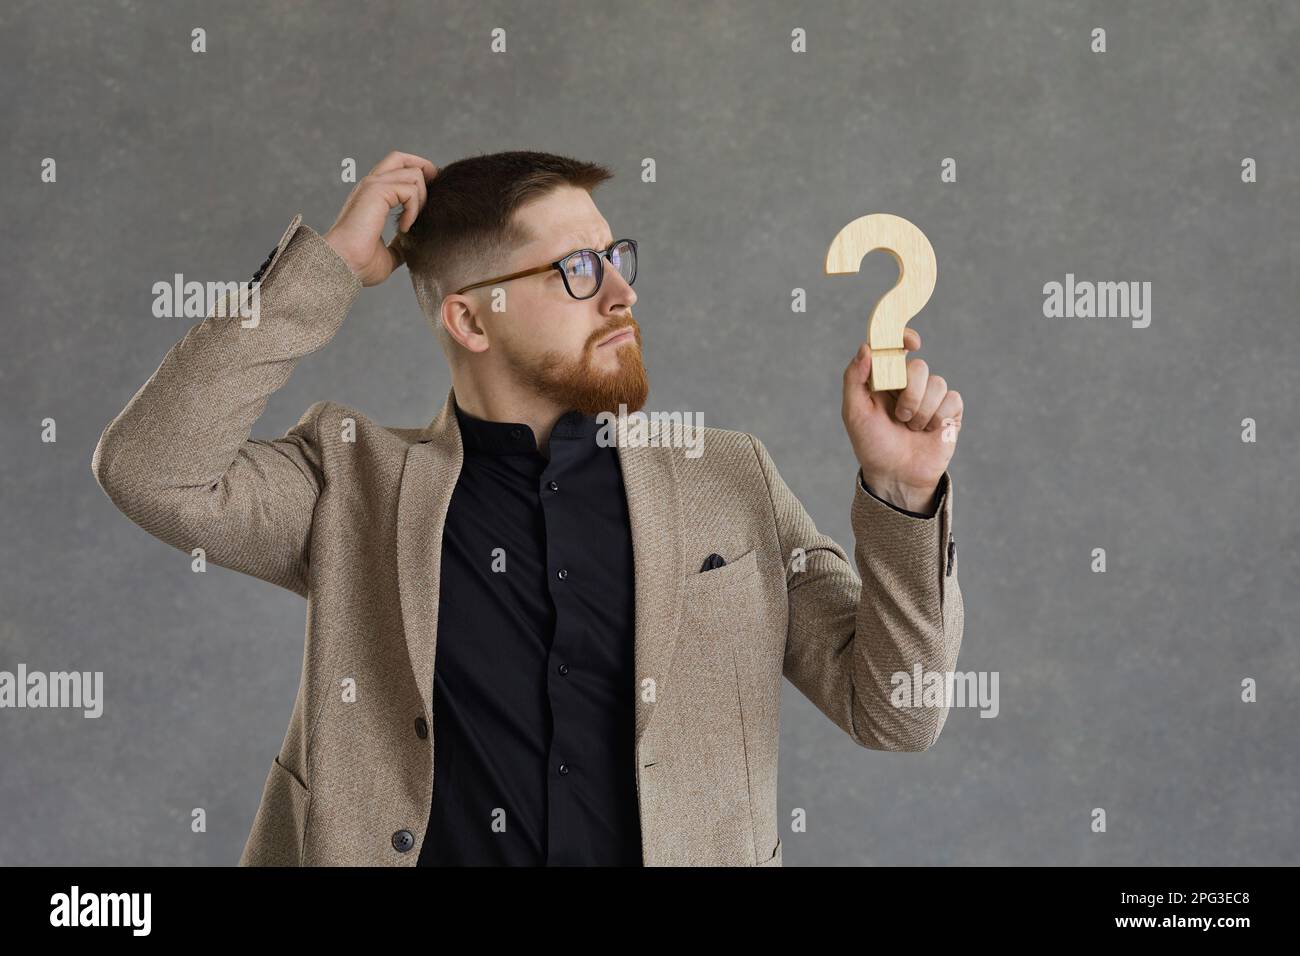 Puzzled man holding question mark, scratching head and thinking of answer to difficult question Stock Photo